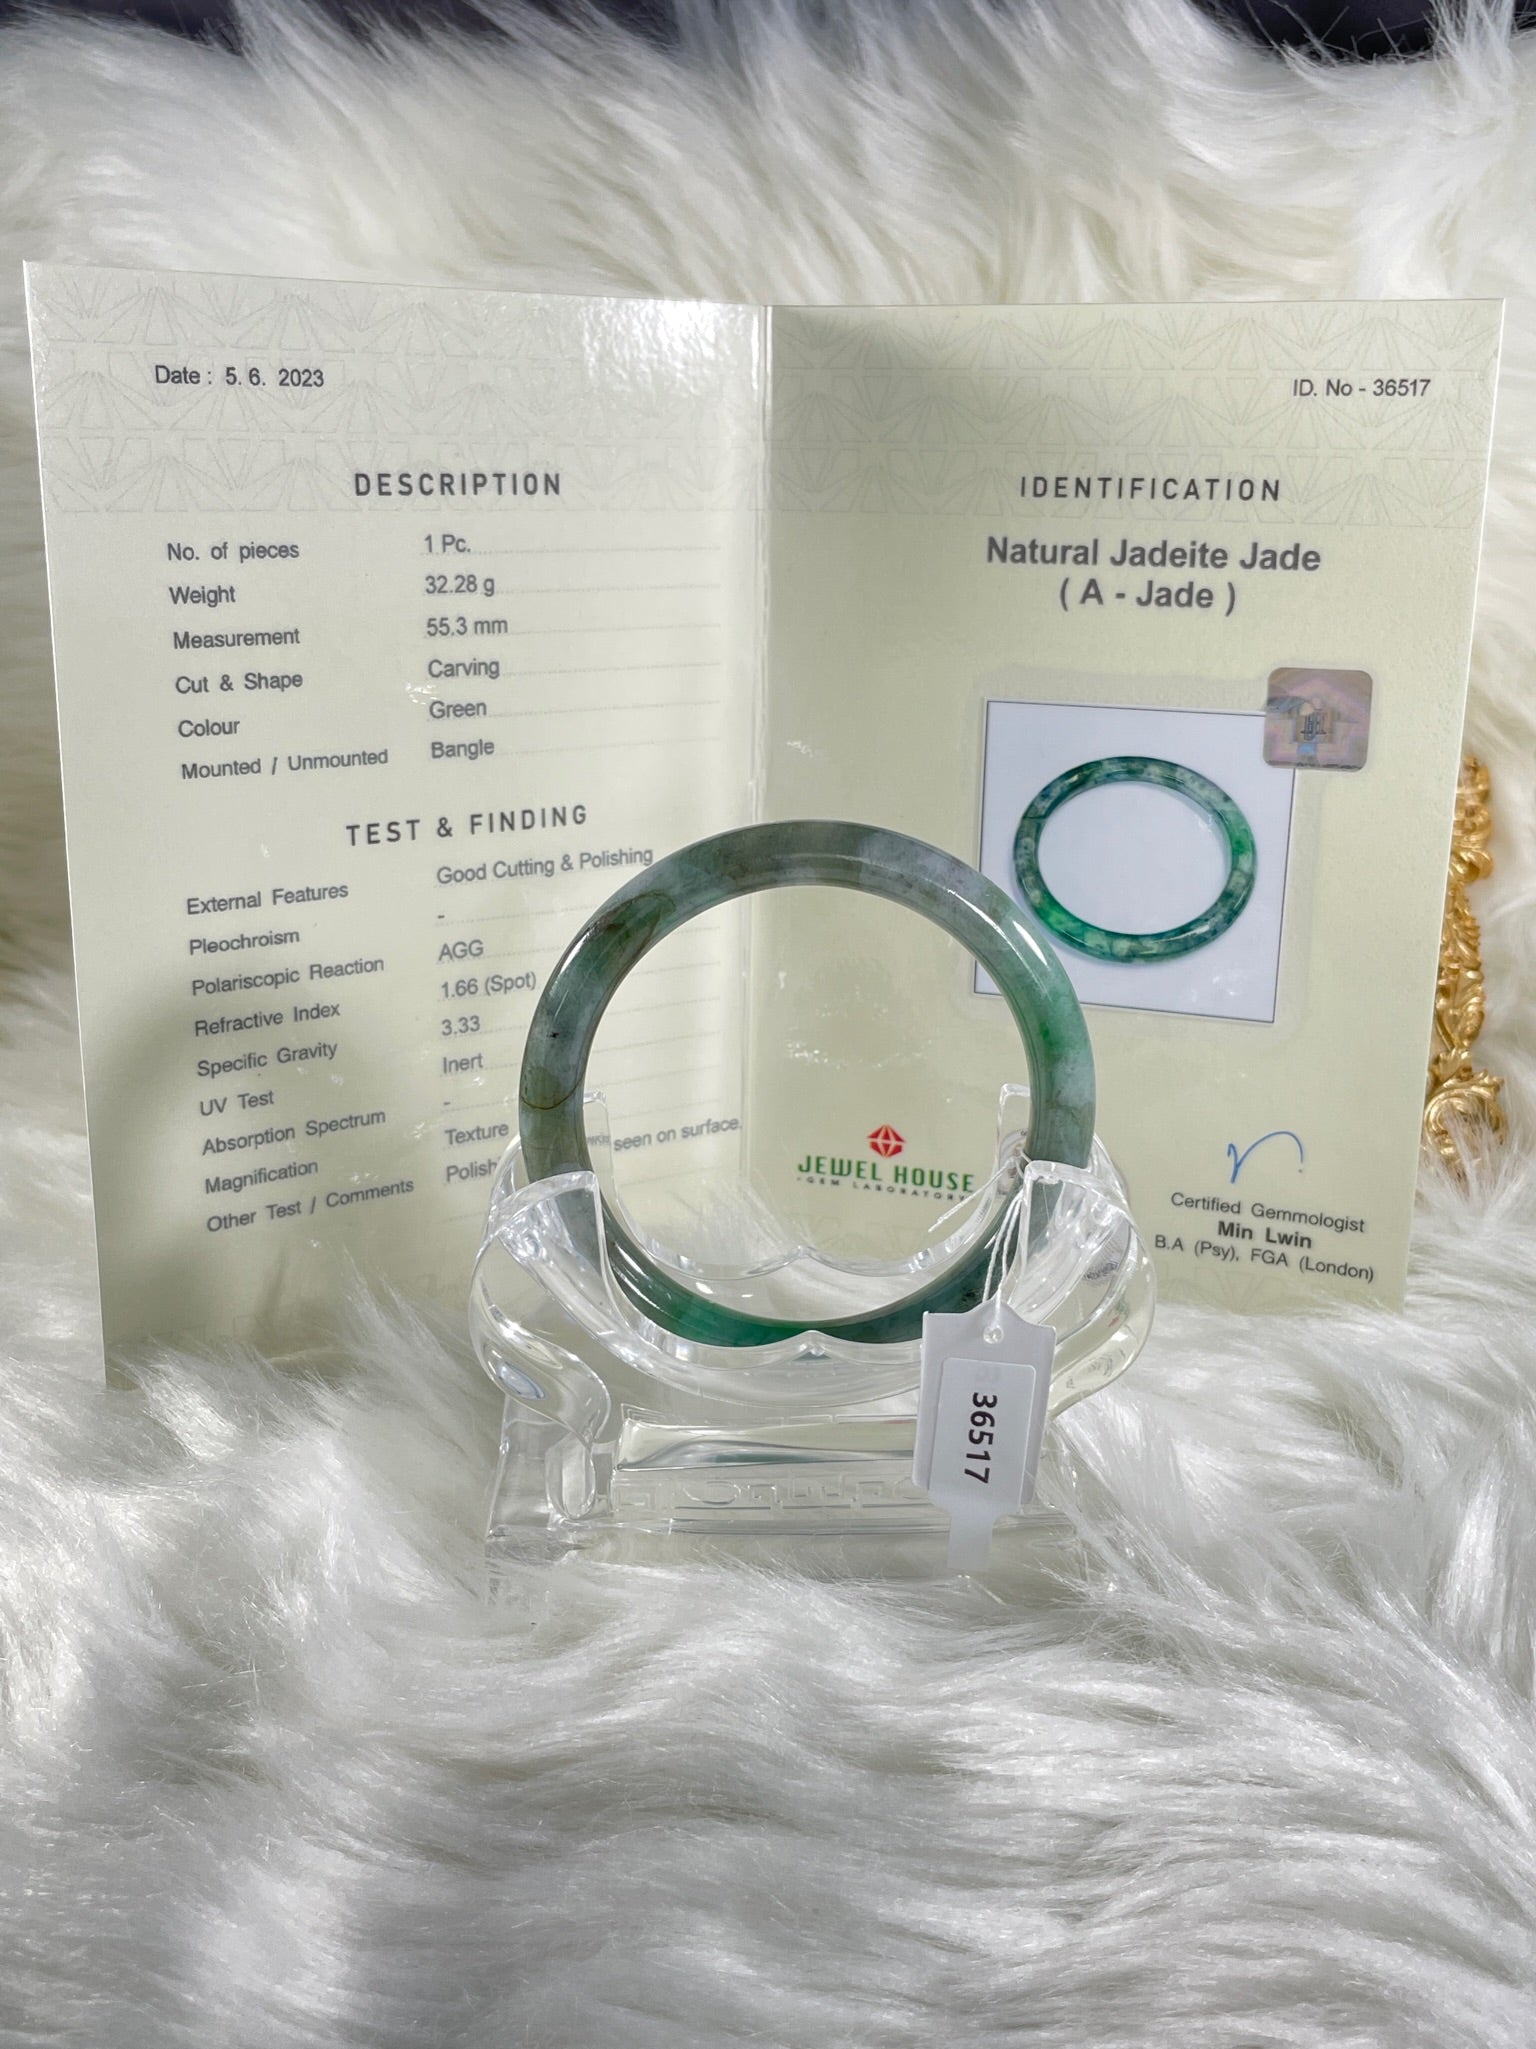 Grade A Natural Jade Bangle with certificate #36517